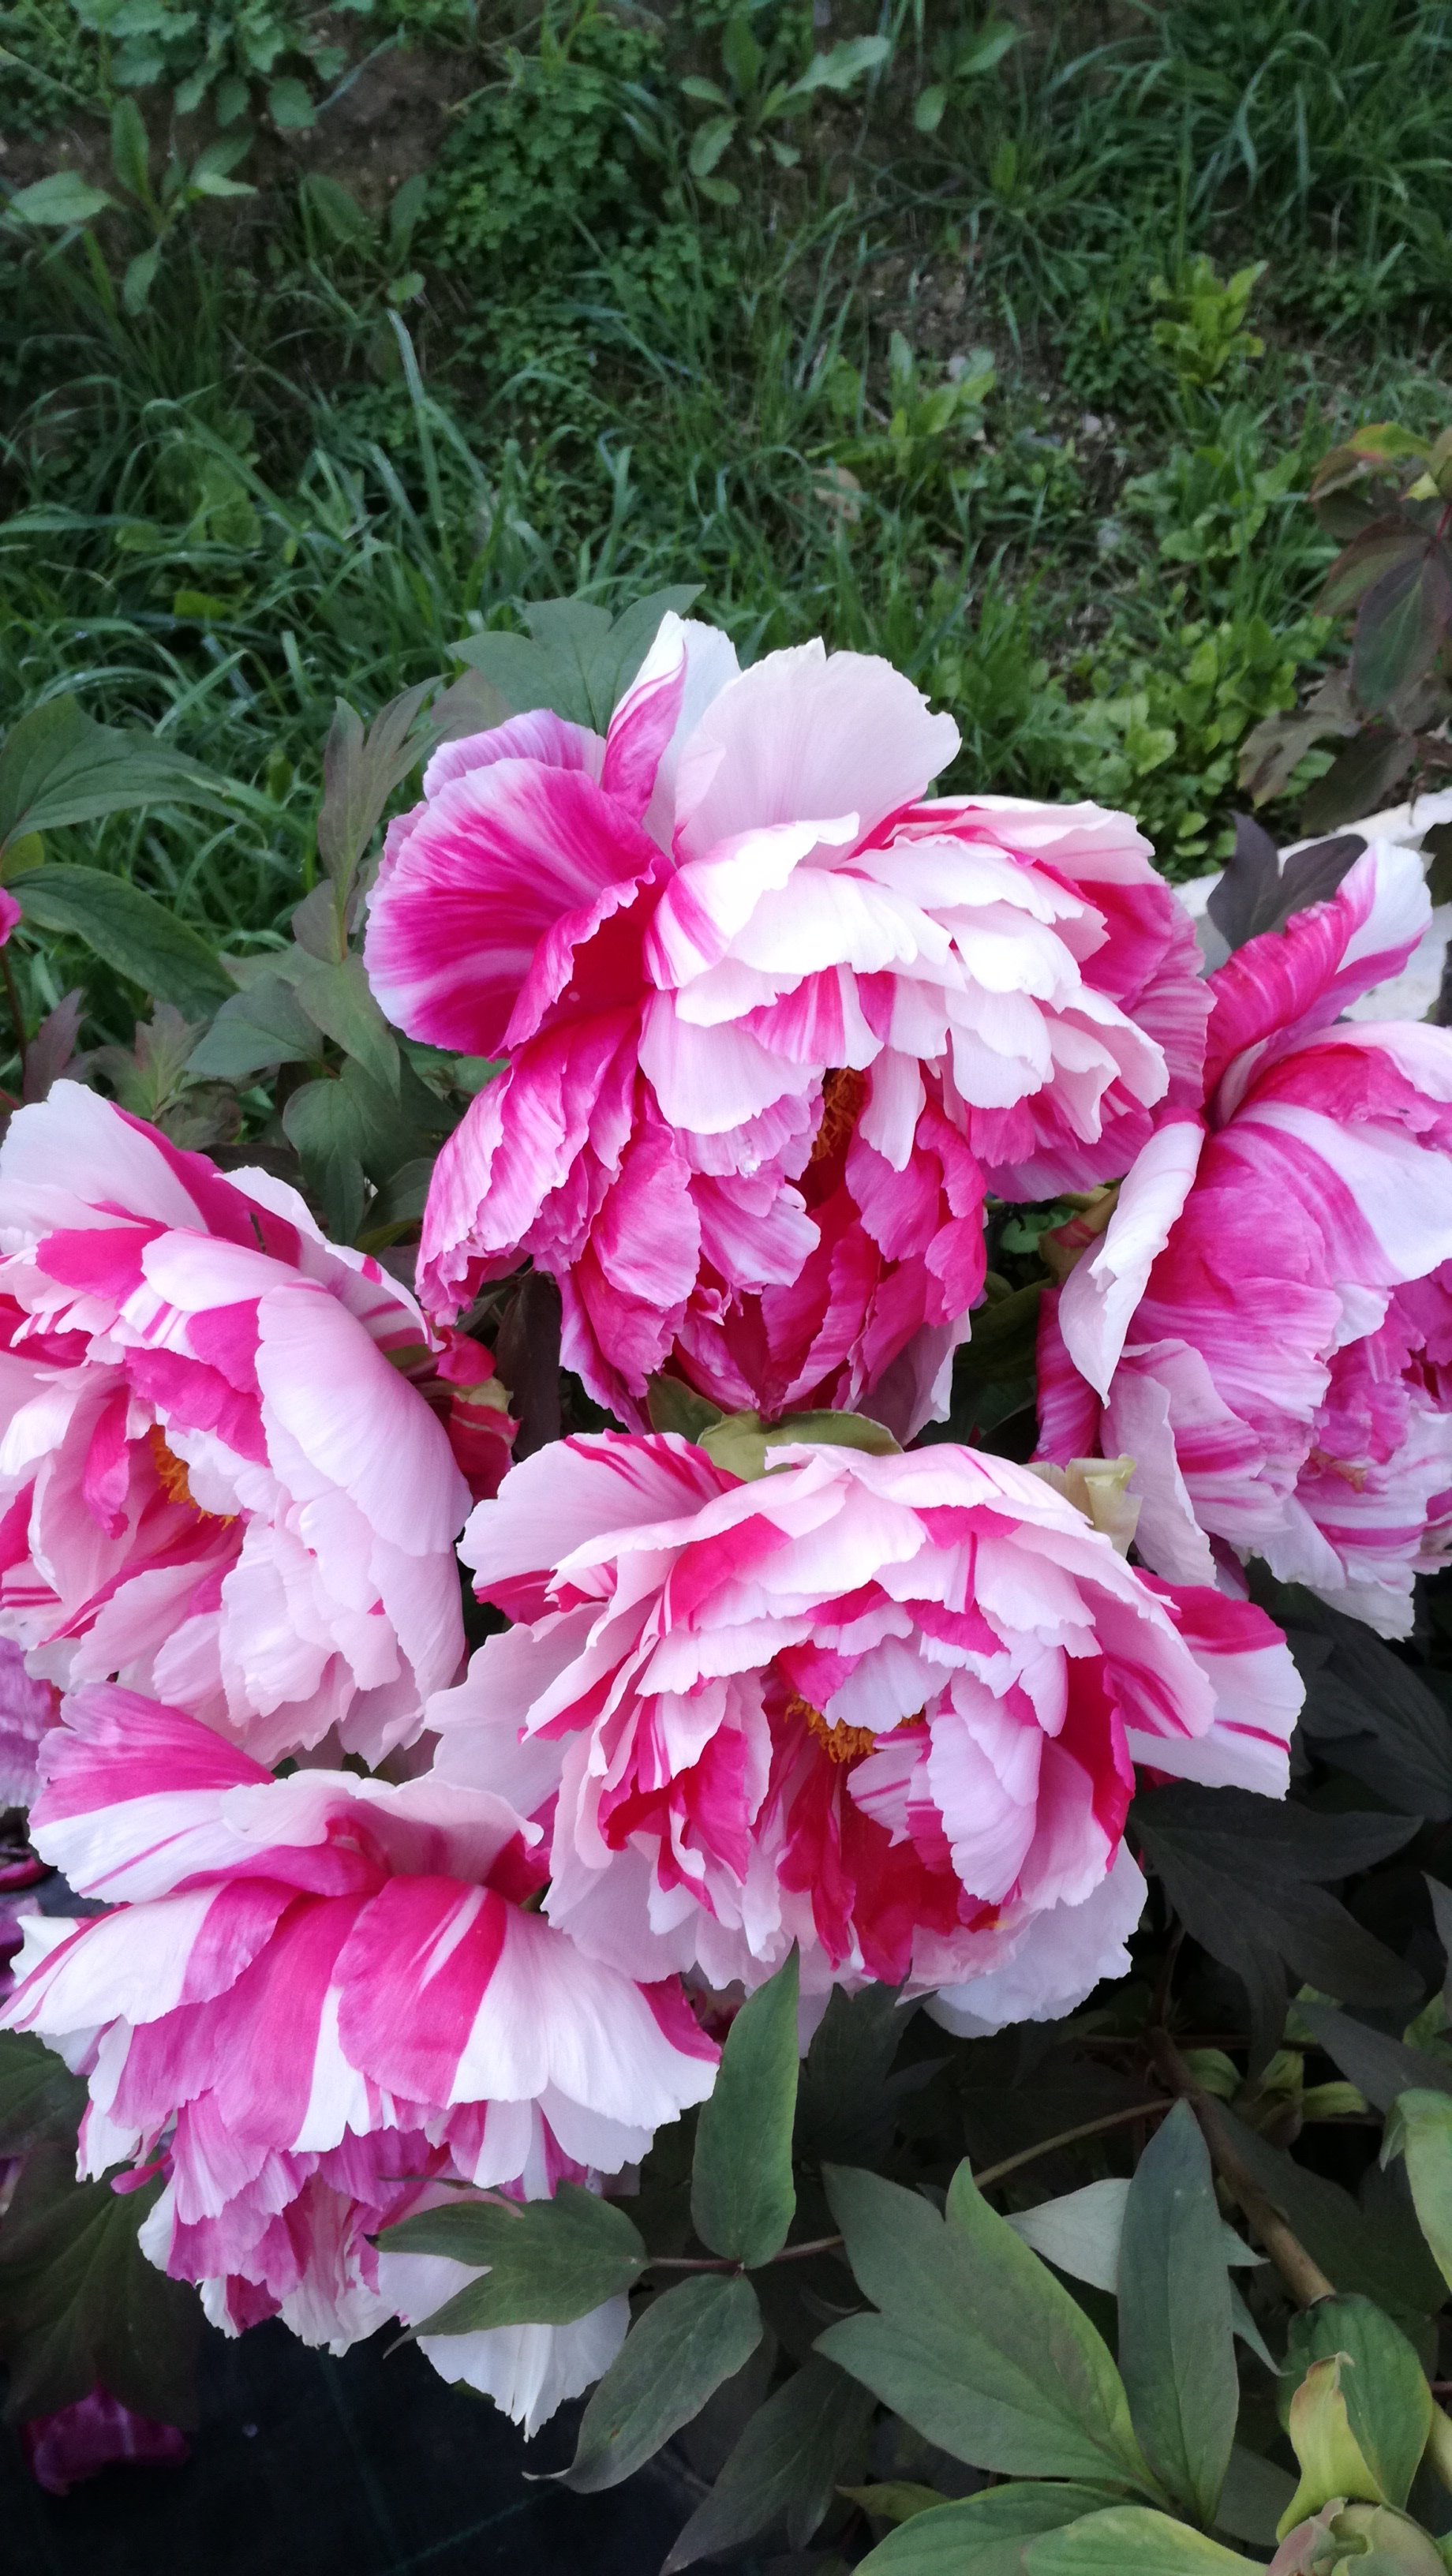 Promotion and development of the peony throughout the Ligurian territory